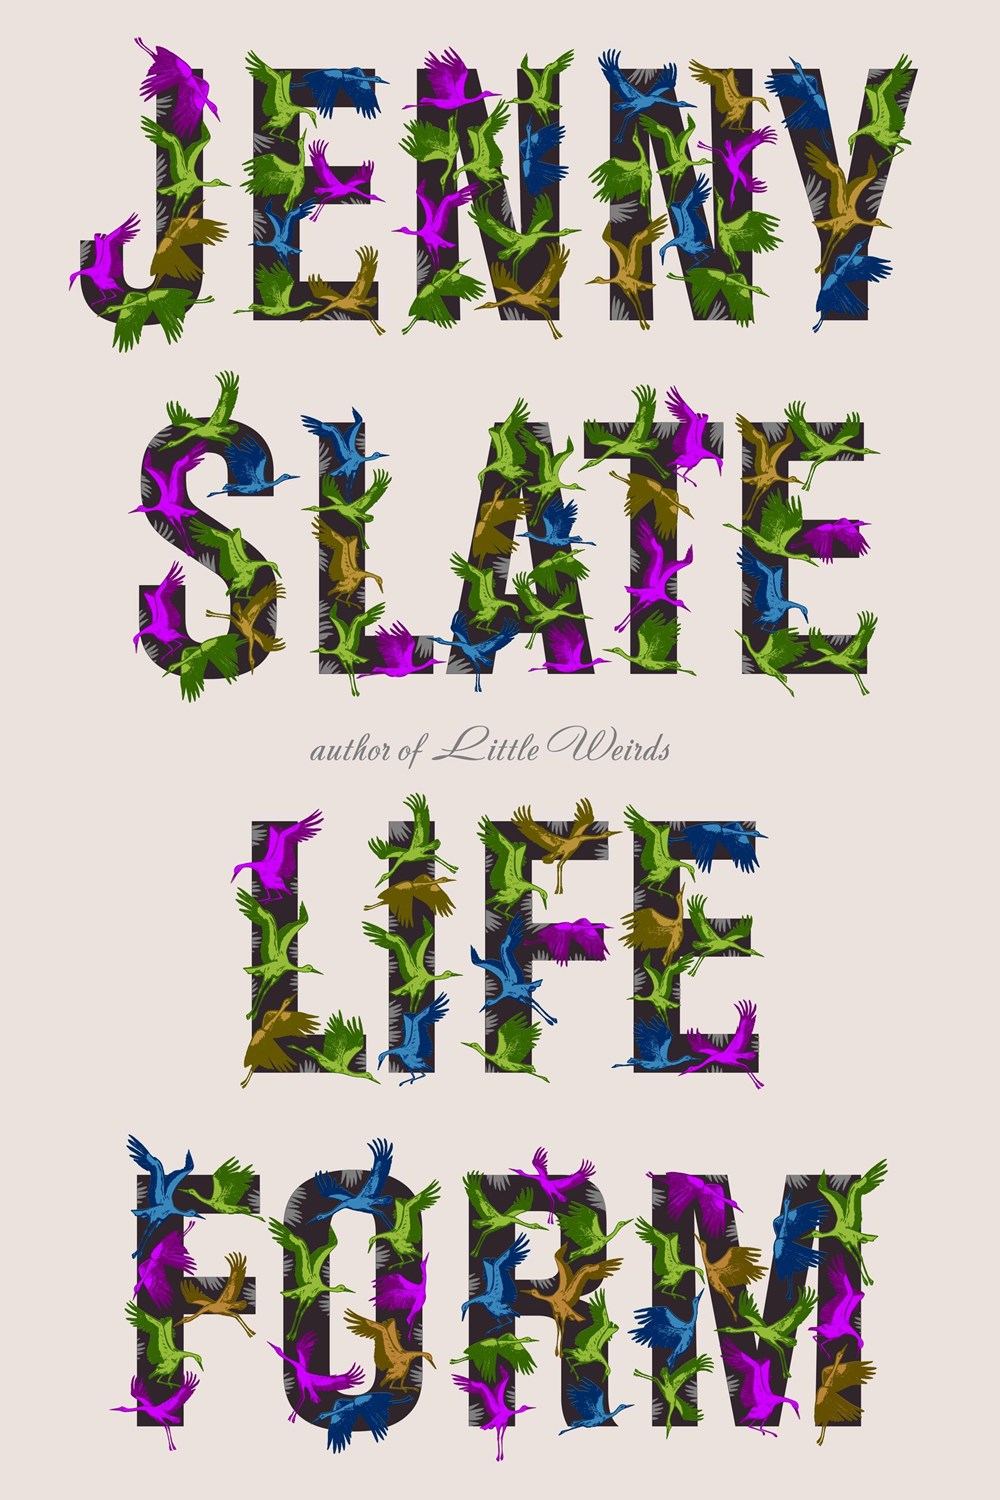 Life-Form-Book-Cover